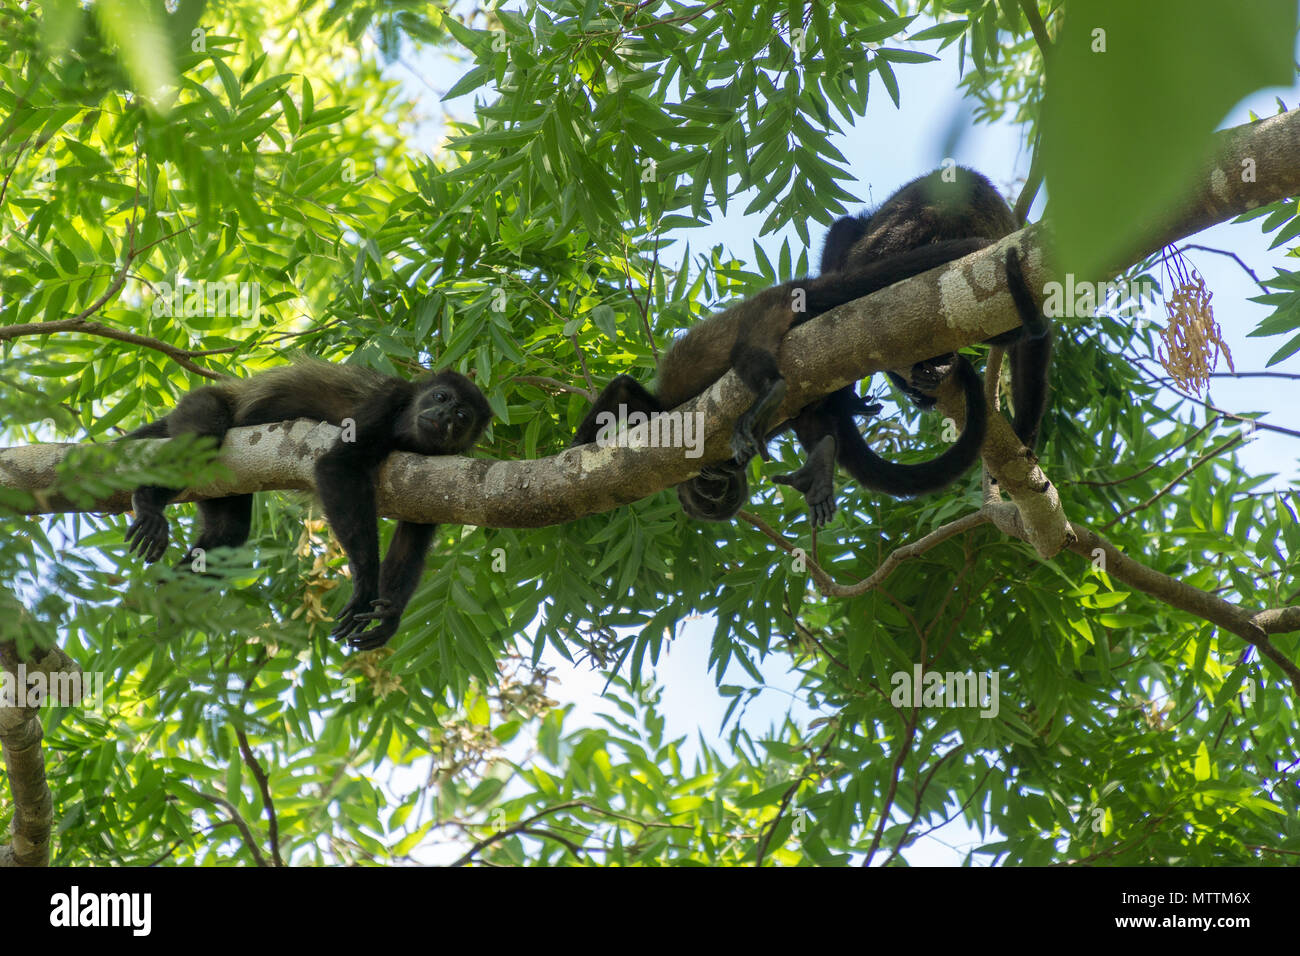 Lazy monkeys hanging from tree, Costa Rica, Central America. Stock Photo